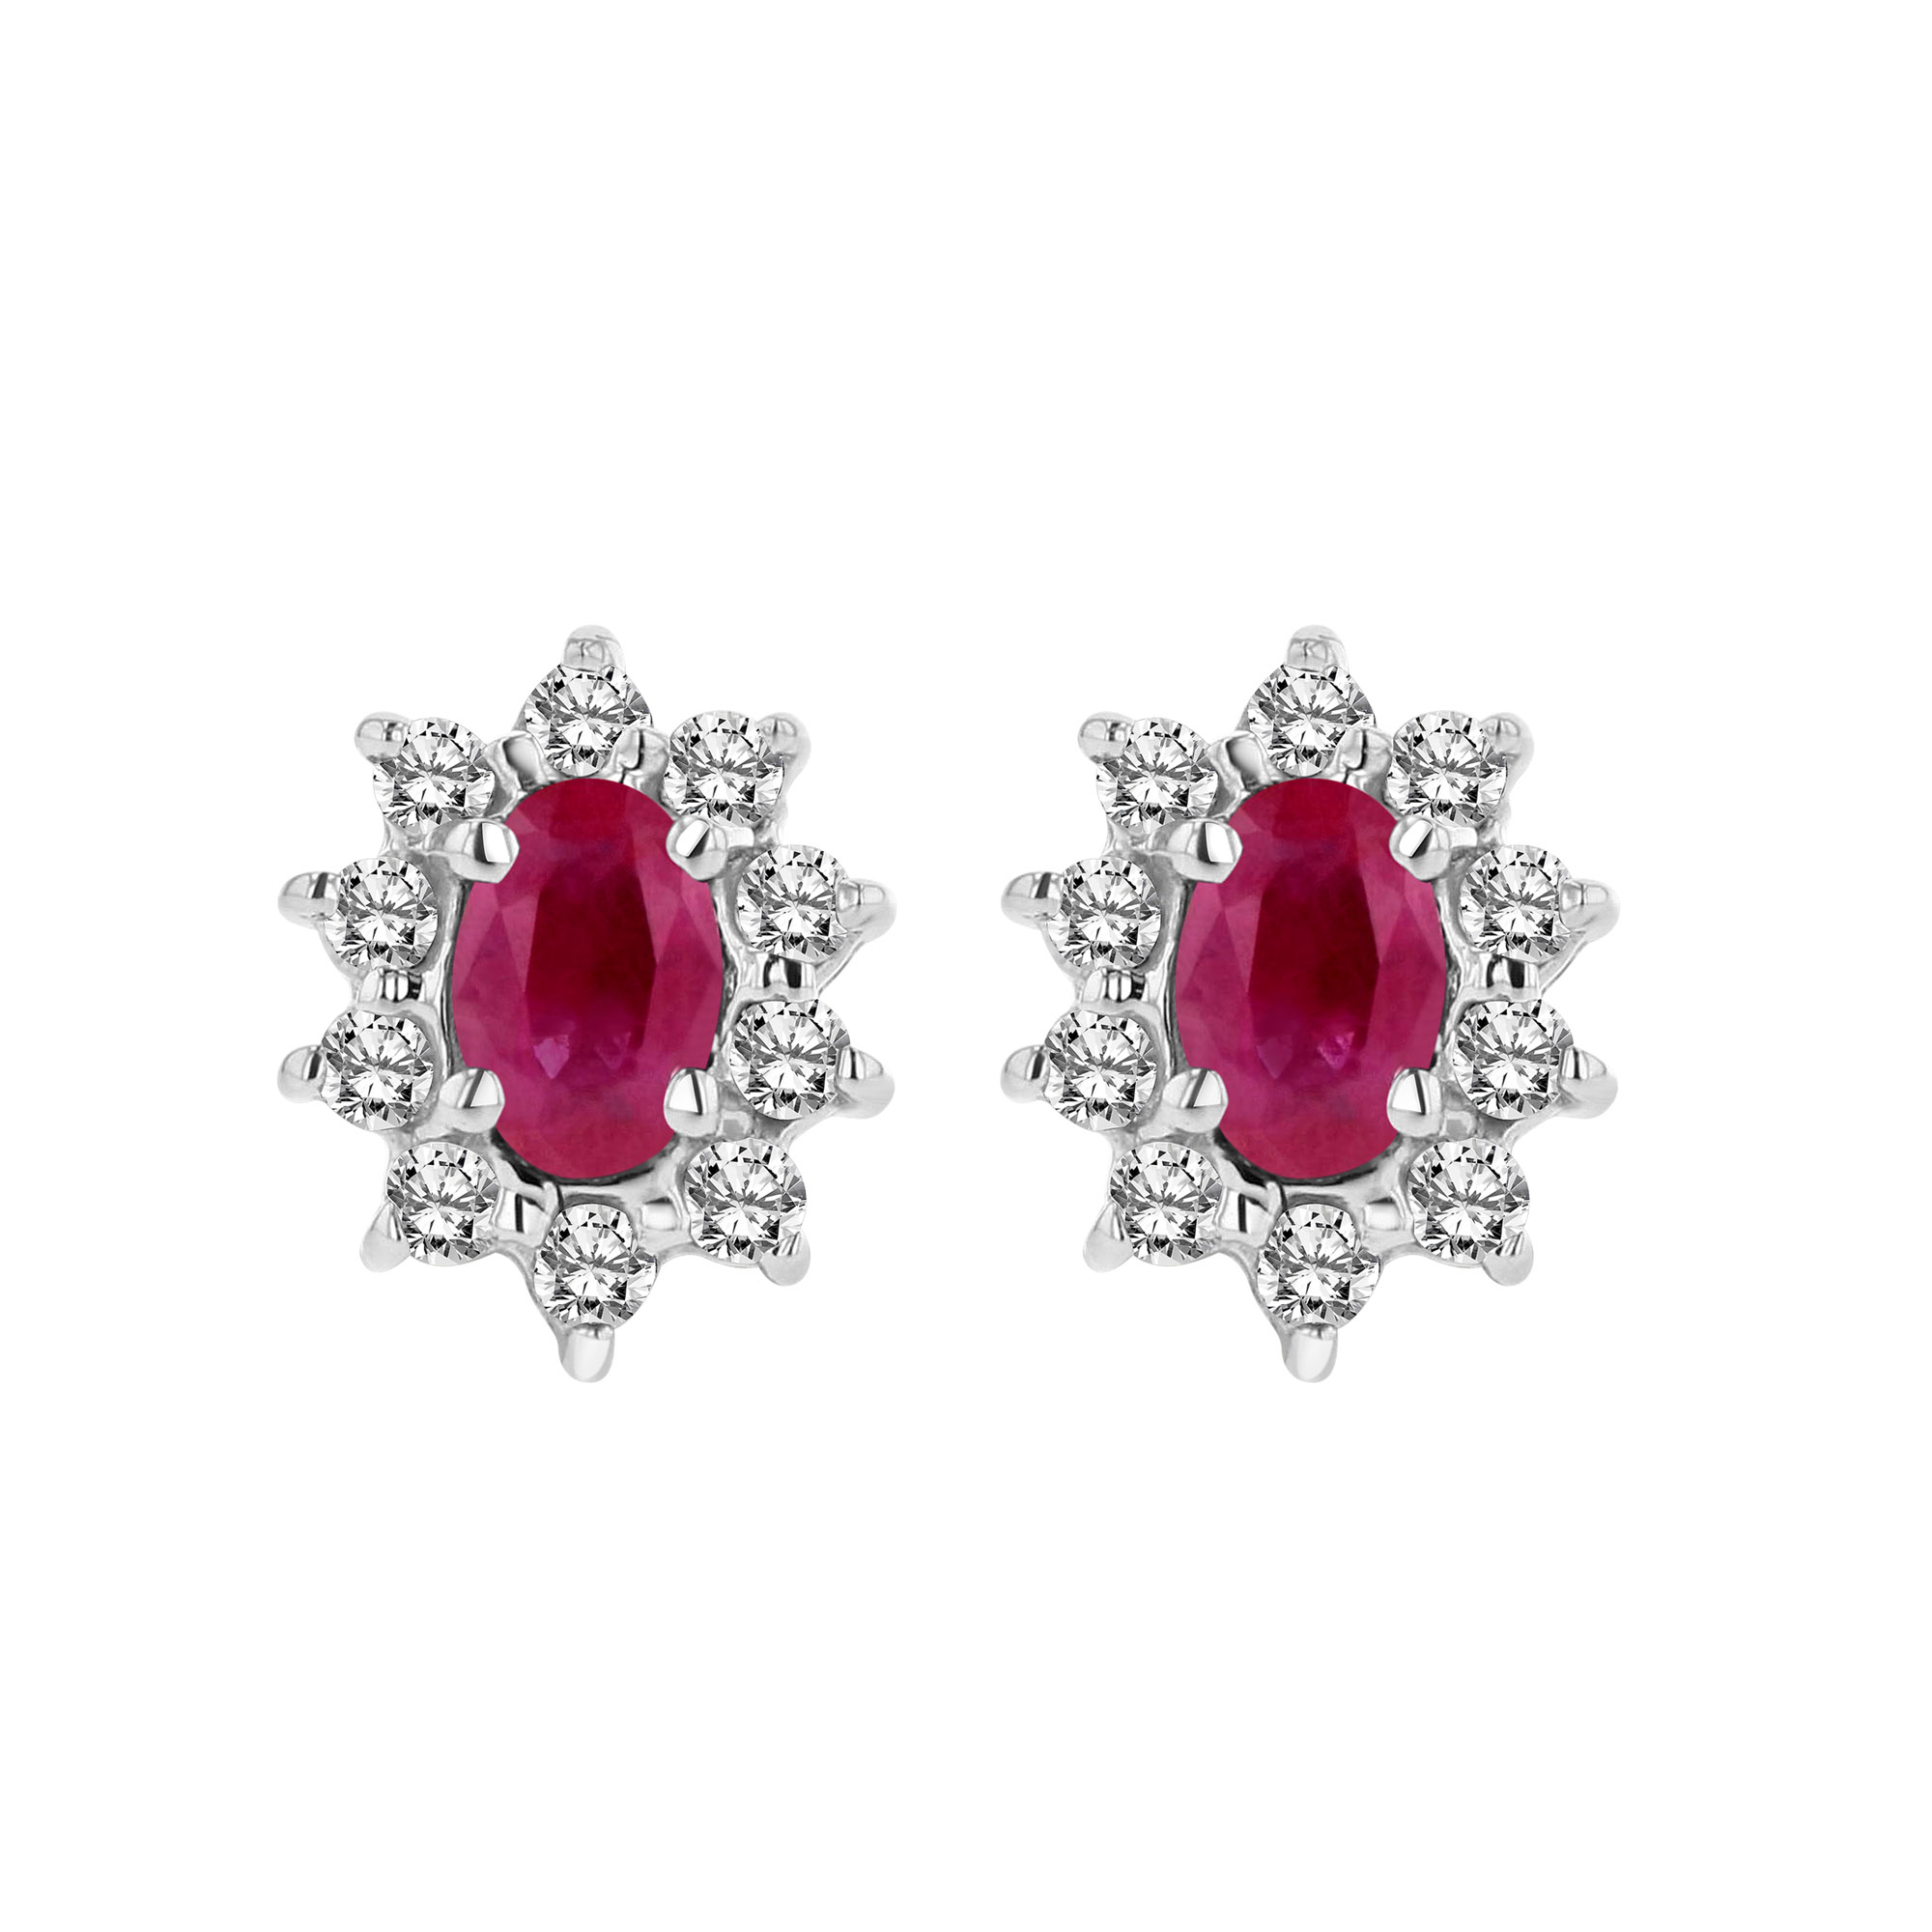 View 0.70cttw Diamond and Natural Heated Ruby Earring in 14k Gold